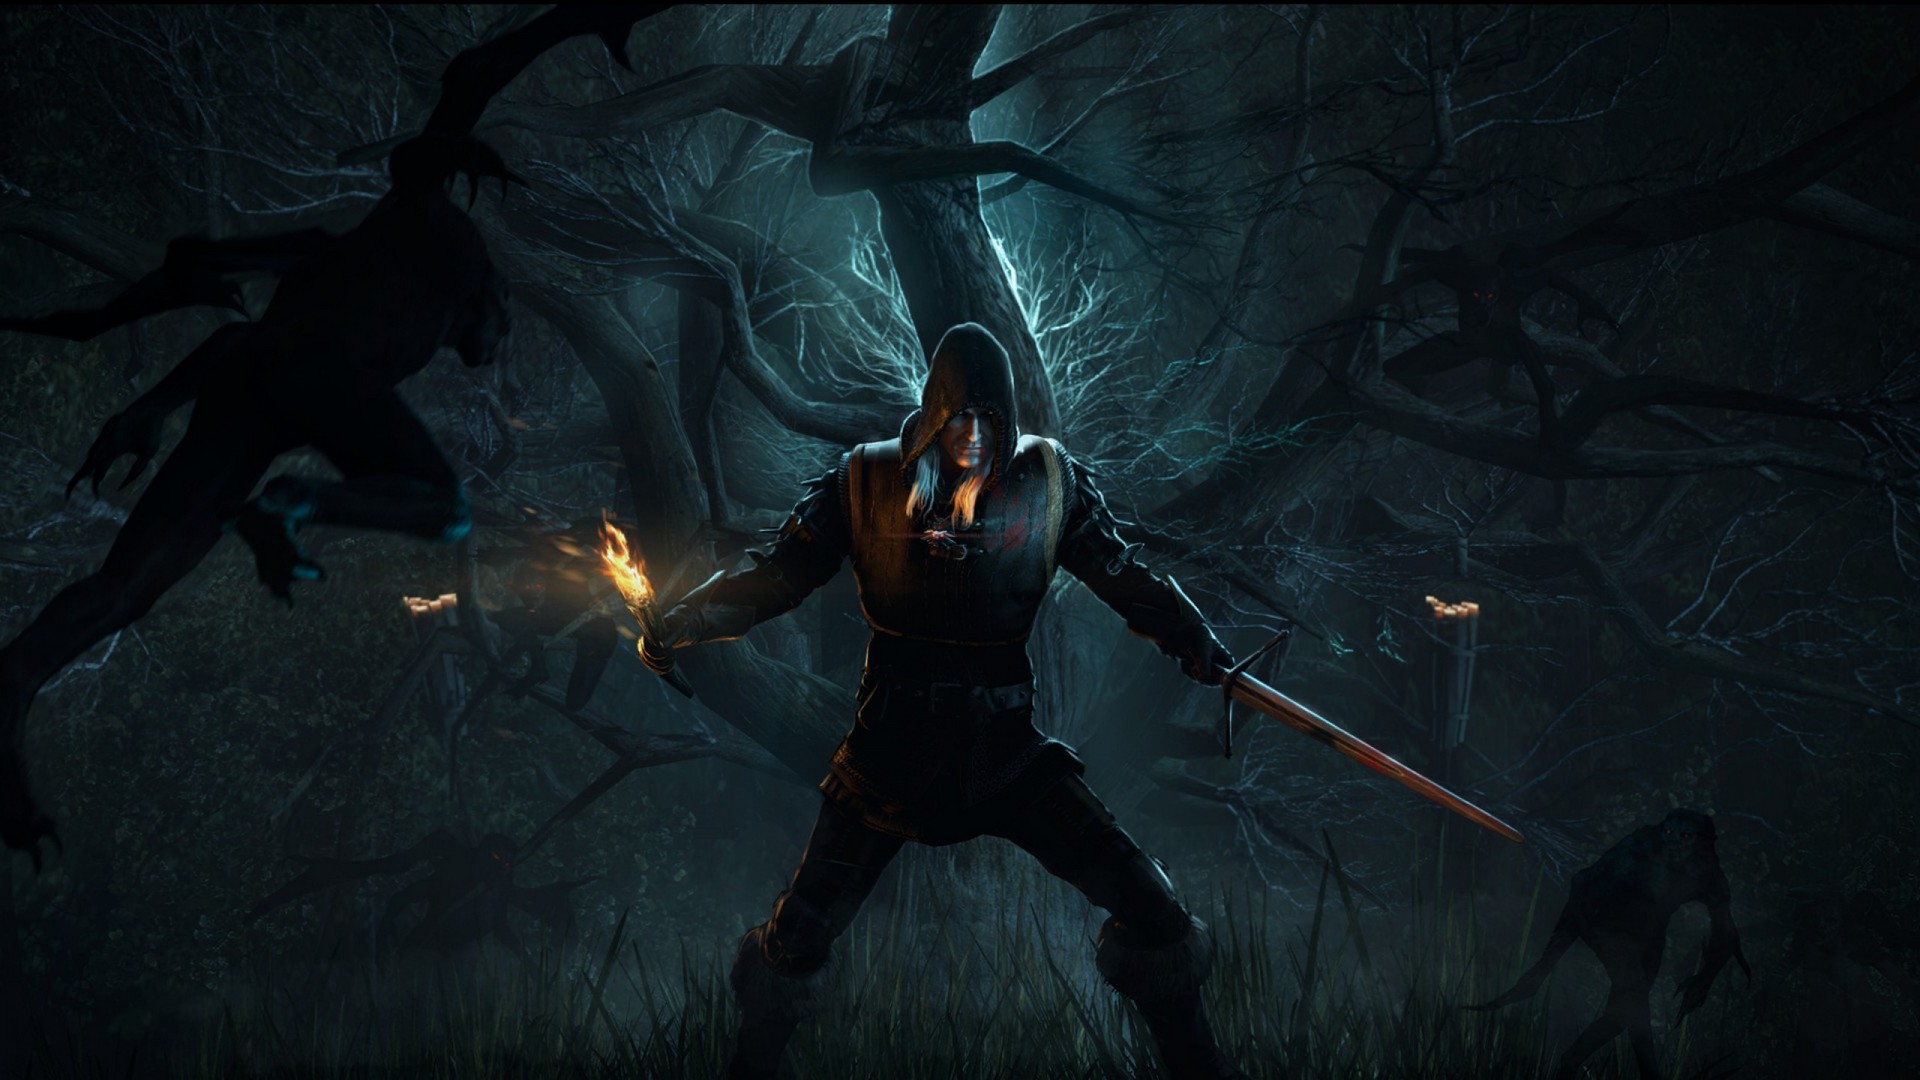 The Witcher Wild Hunt Full Movie Wallpaper with high-resolution 1920x1080 pixel. You can use this poster wallpaper for your Desktop Computers, Mac Screensavers, Windows Backgrounds, iPhone Wallpapers, Tablet or Android Lock screen and another Mobile device